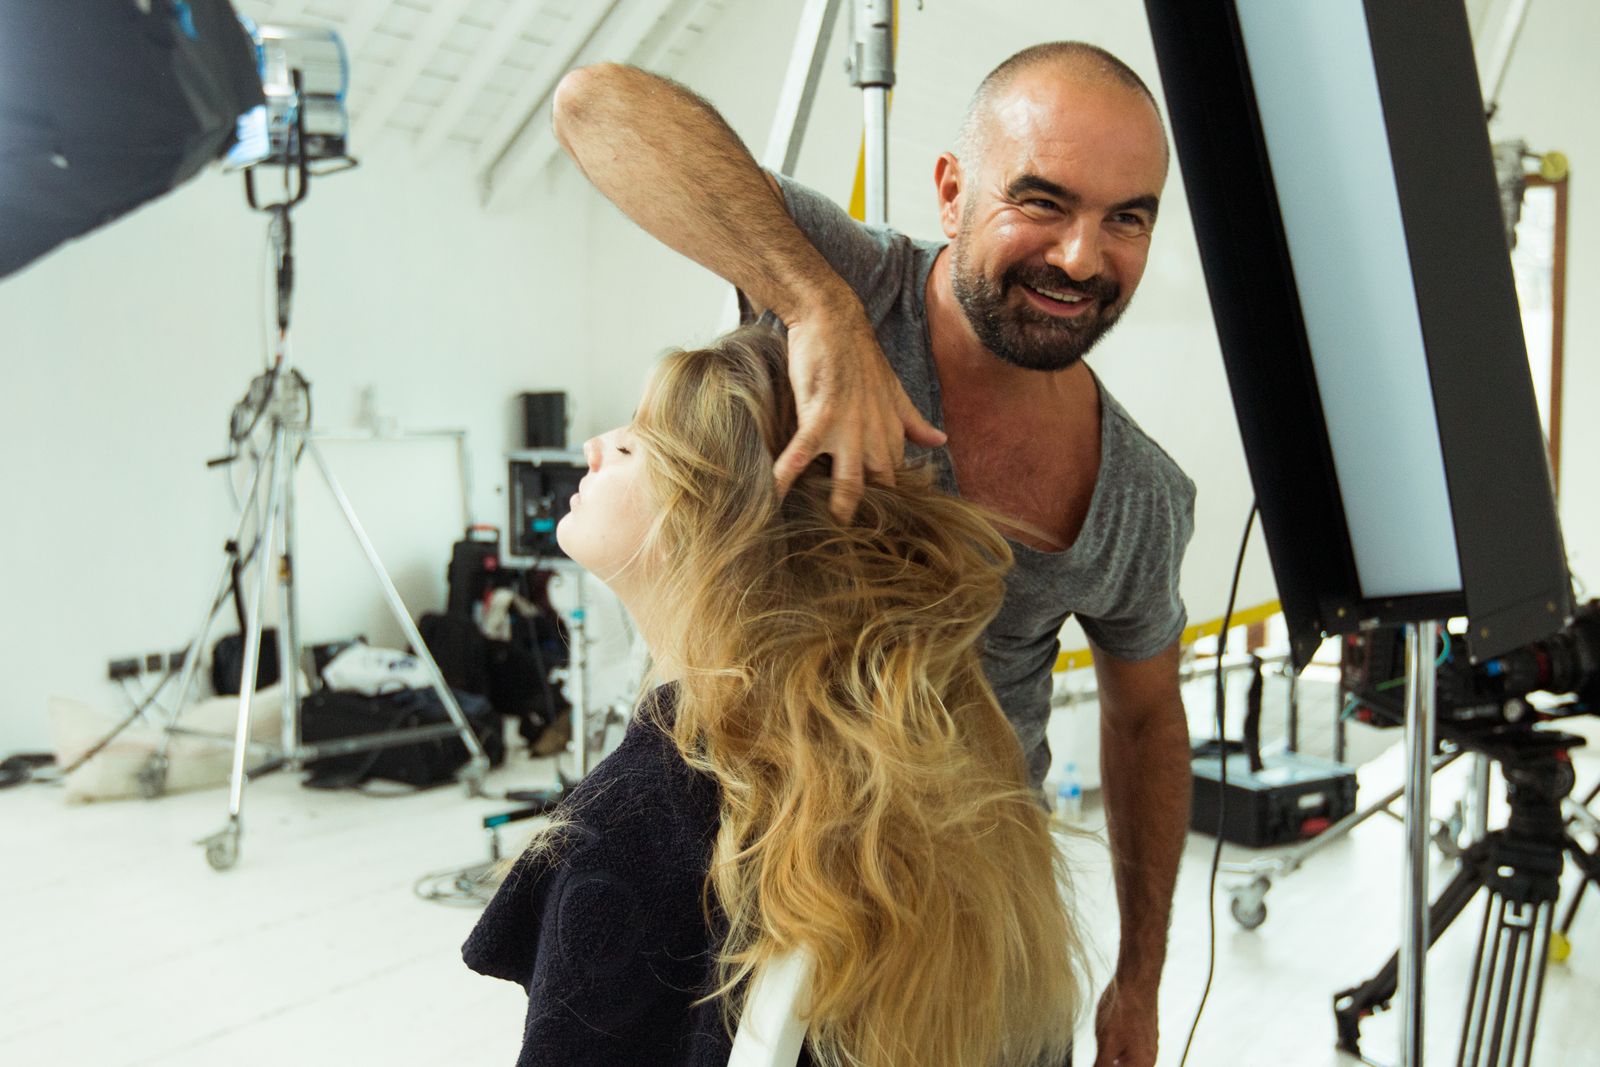 Hairstylist Andrew Barton answers your questions